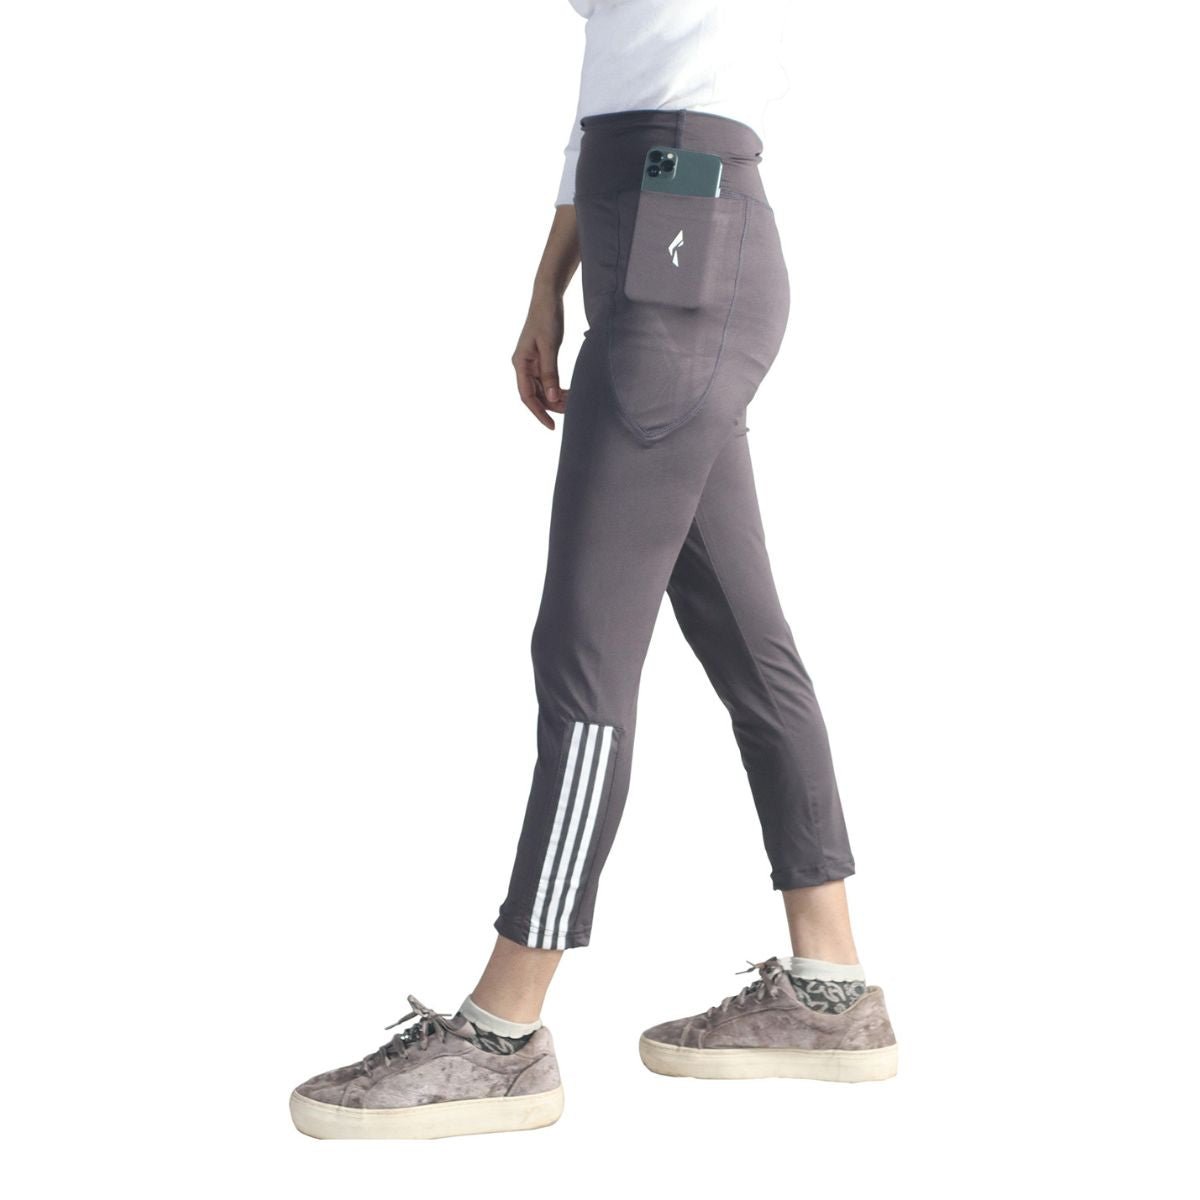 Flush Fashion - Pack Of 3 Women's Yoga Pants with Pockets Sports